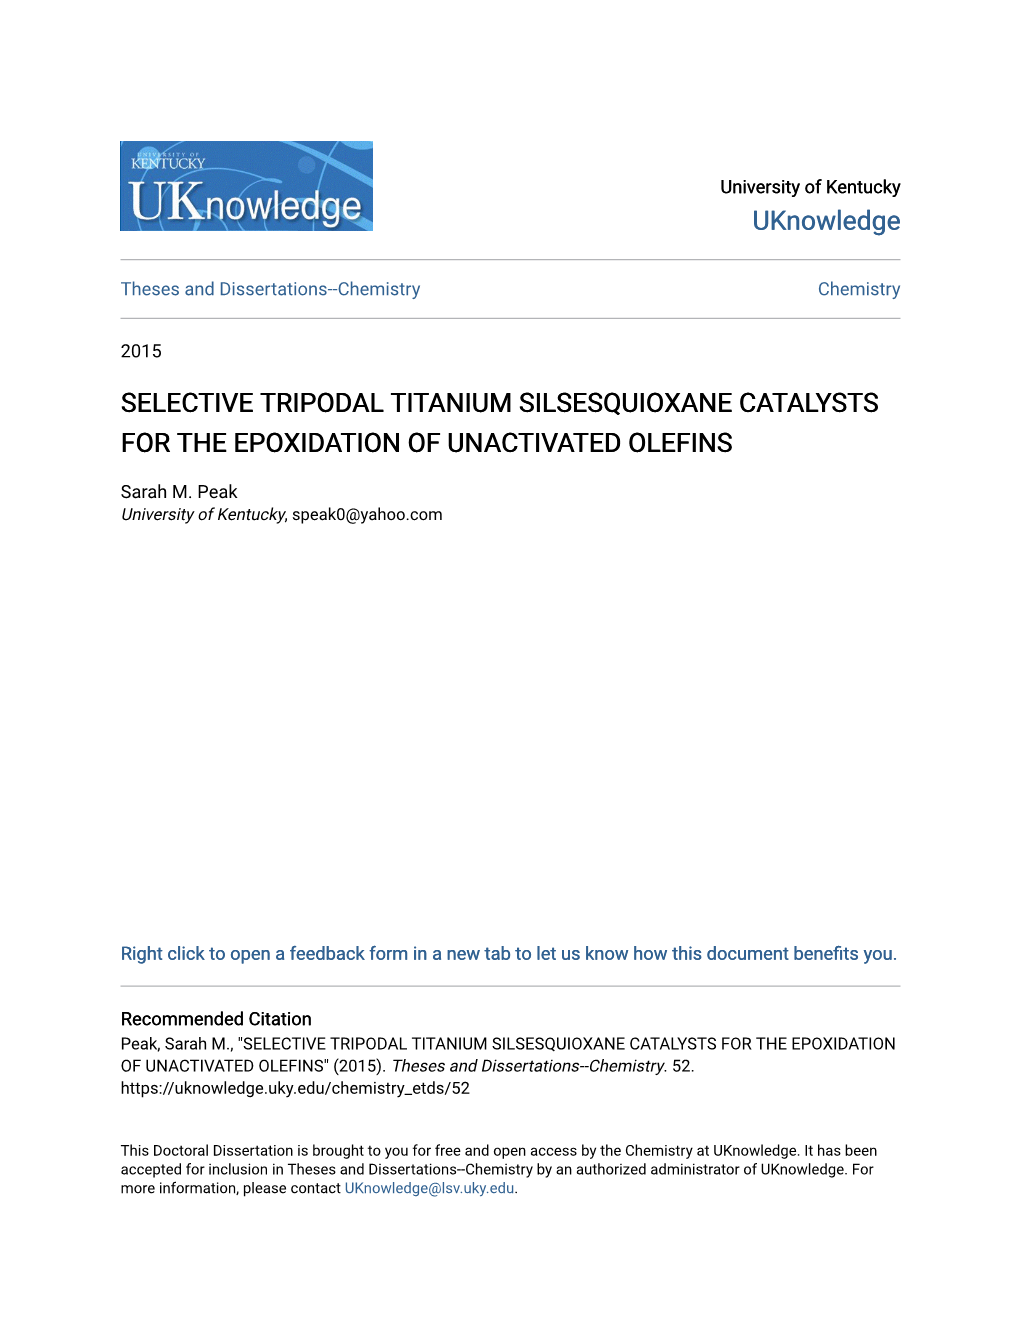 Selective Tripodal Titanium Silsesquioxane Catalysts for the Epoxidation of Unactivated Olefins